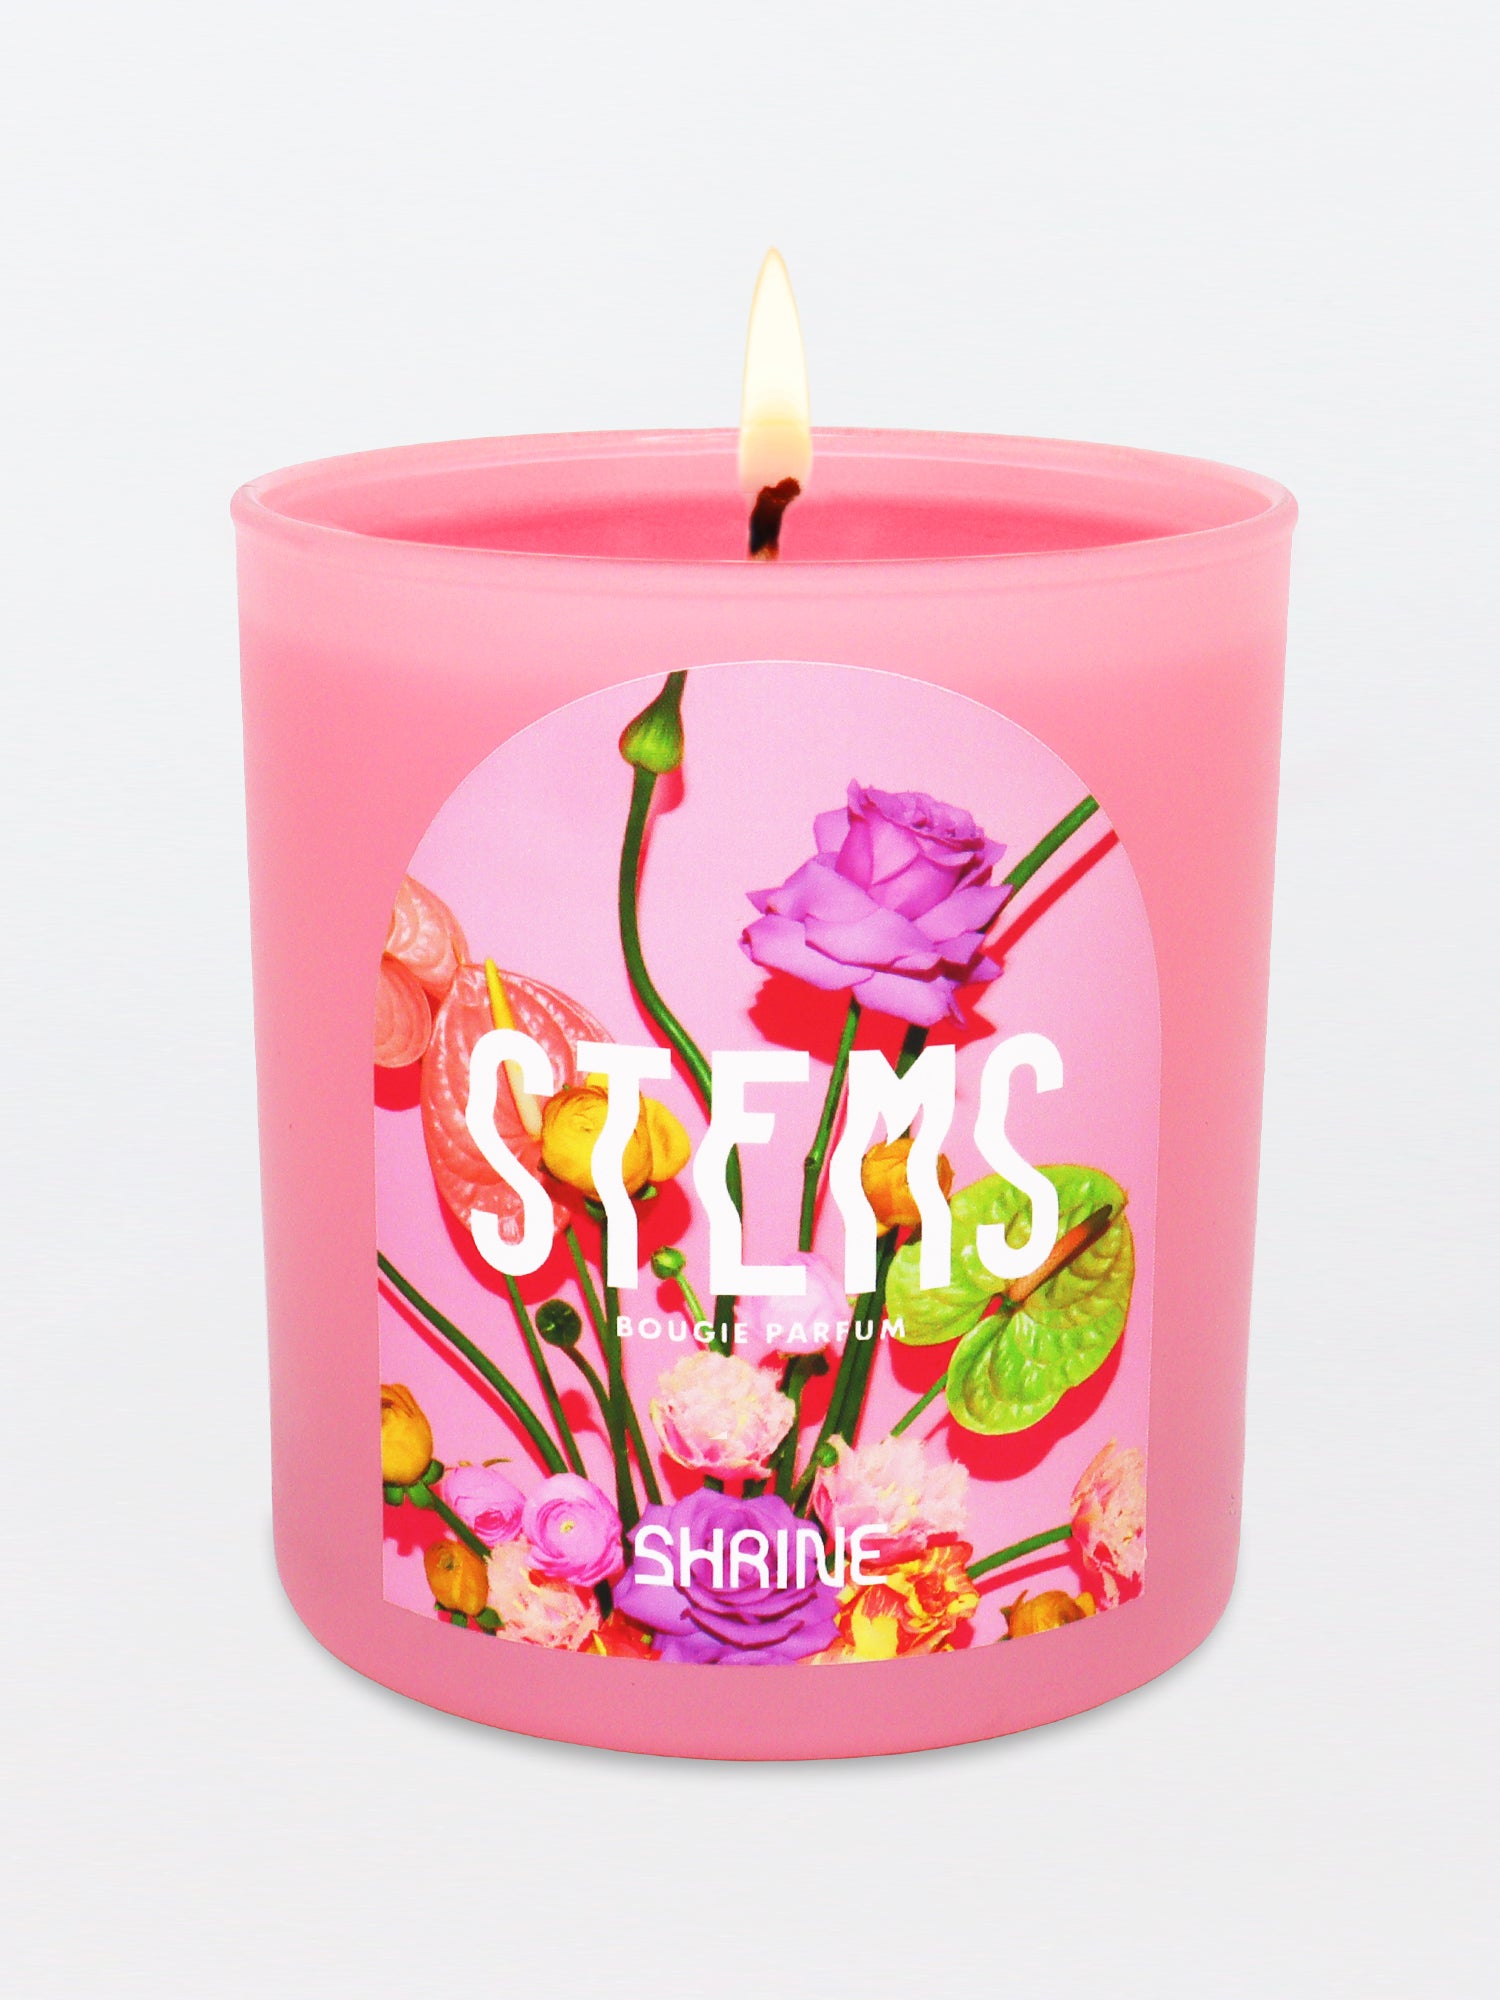 shrine stems pink floral candle with roses and anthurium flowers on the label shop shrine shopshrine